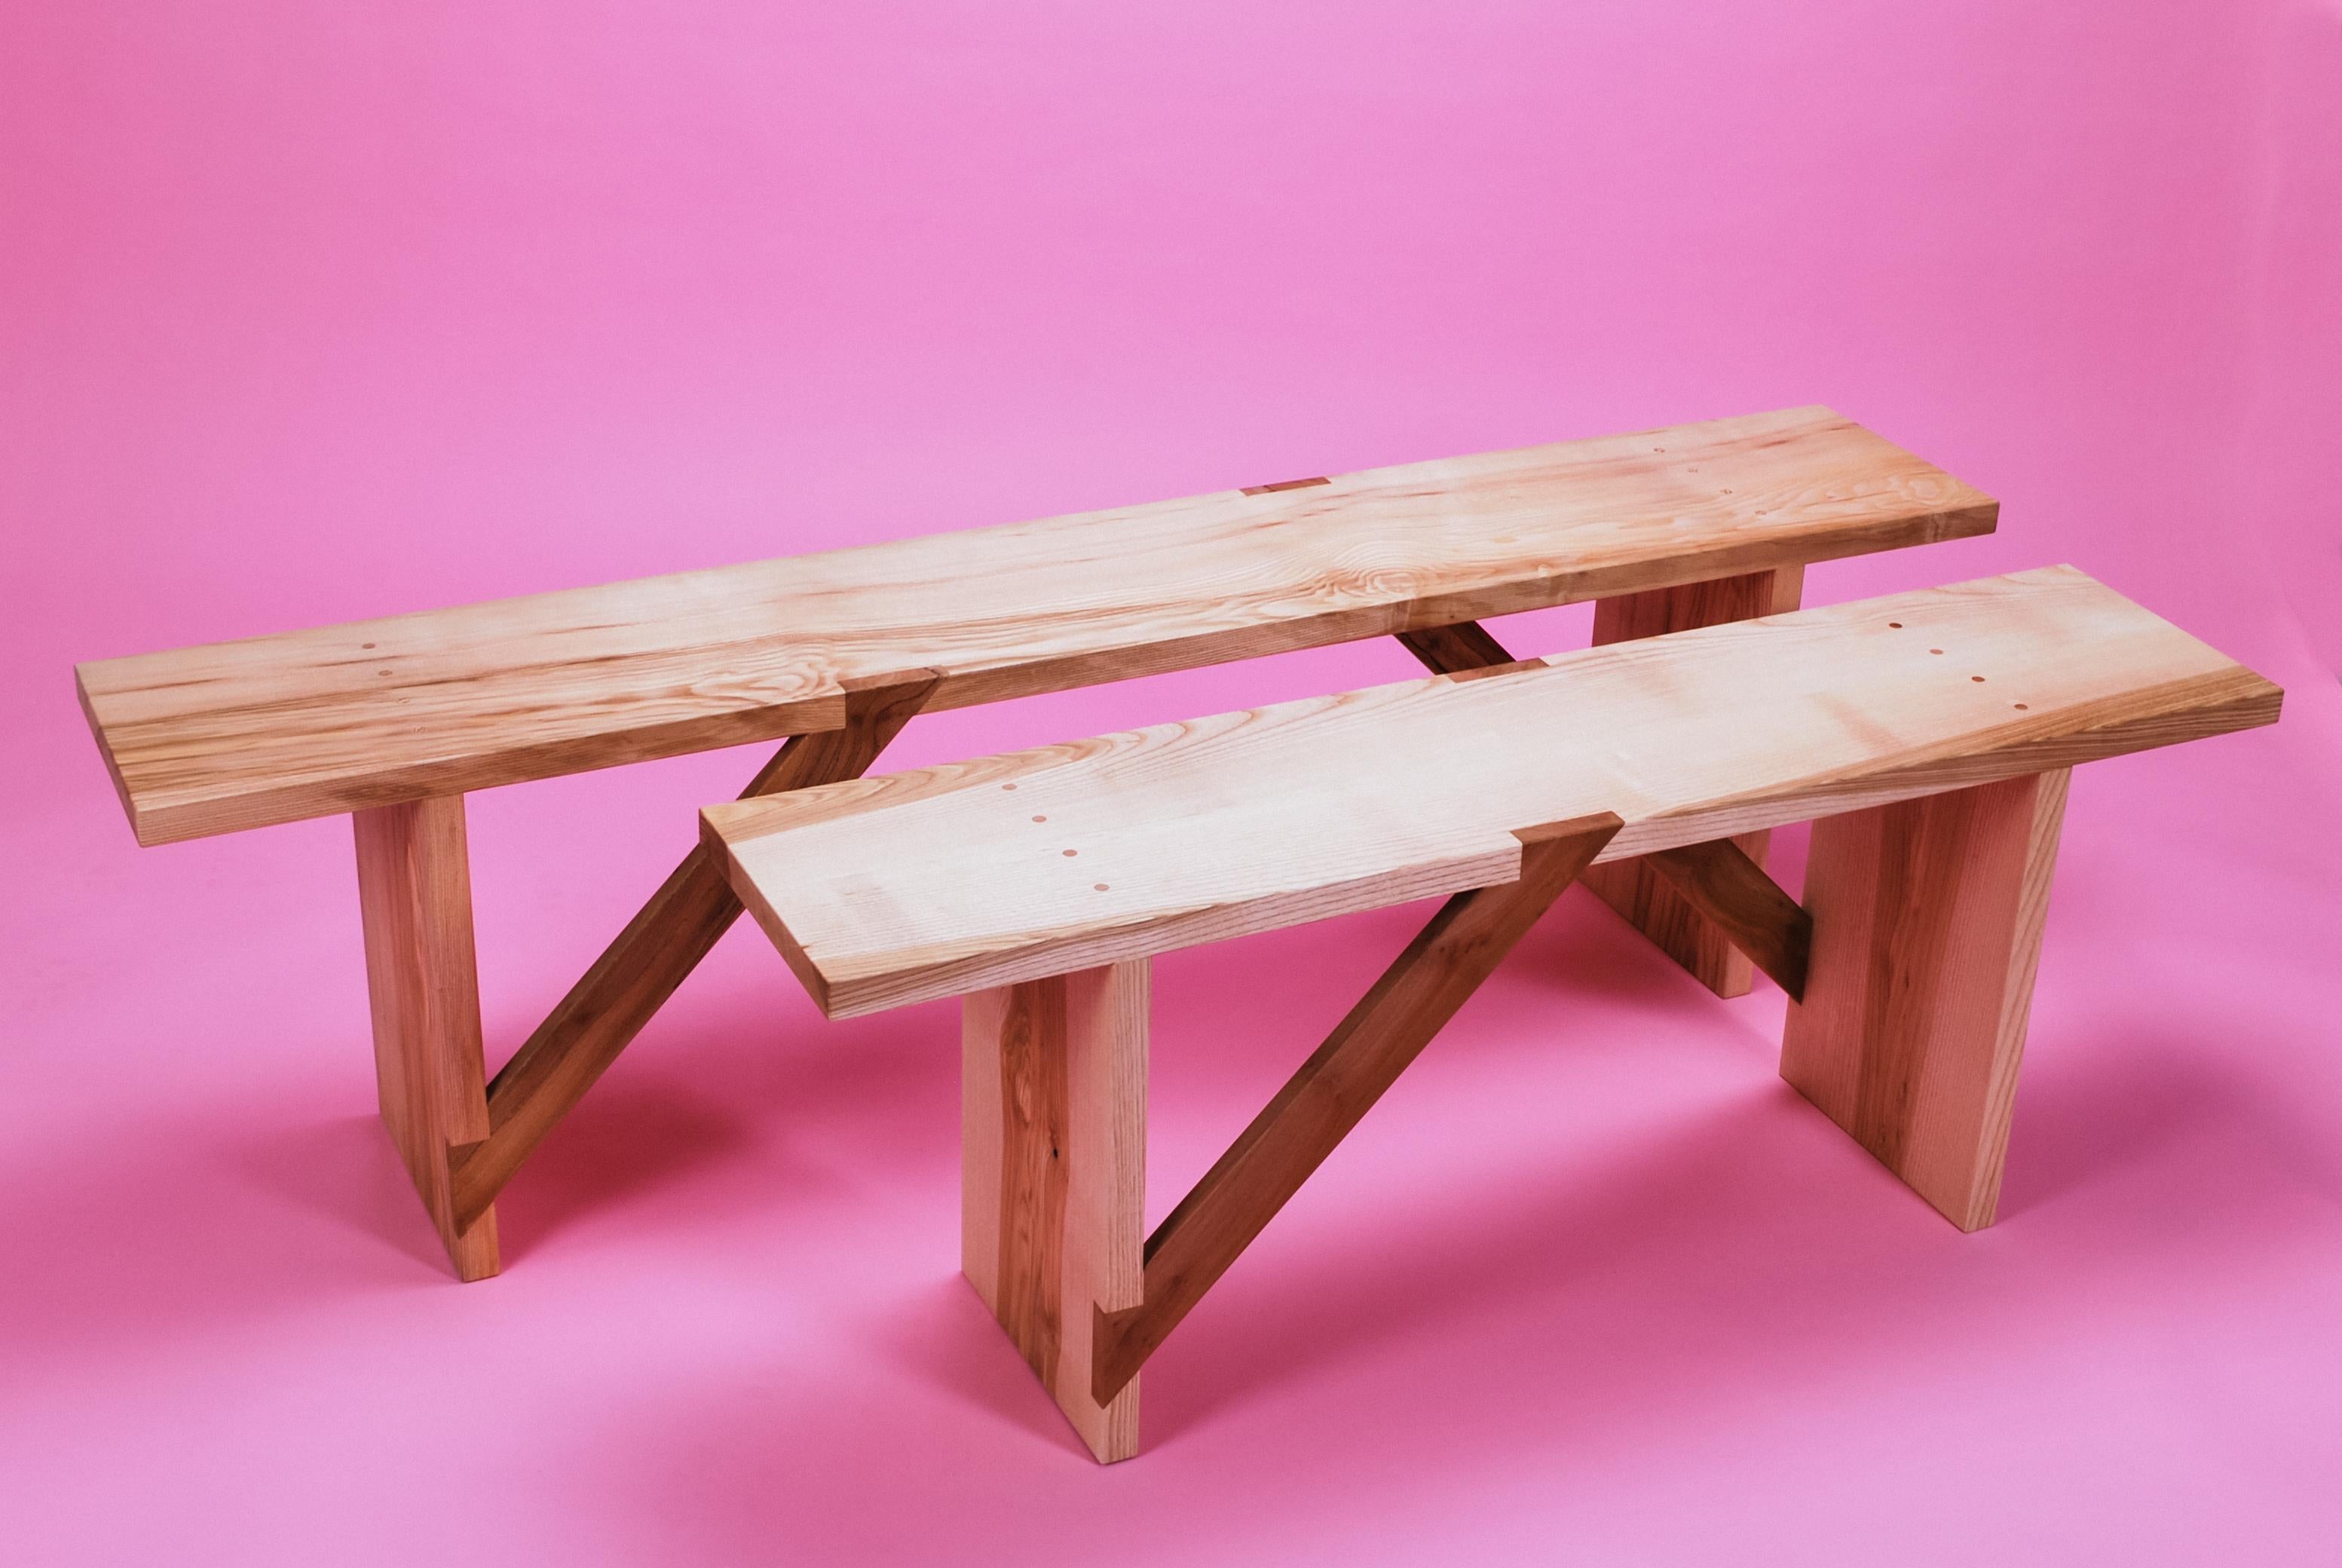 Hand-Crafted Bench in Solid English Ash and London Plane Wood Handmade in the UK Seats Three For Sale